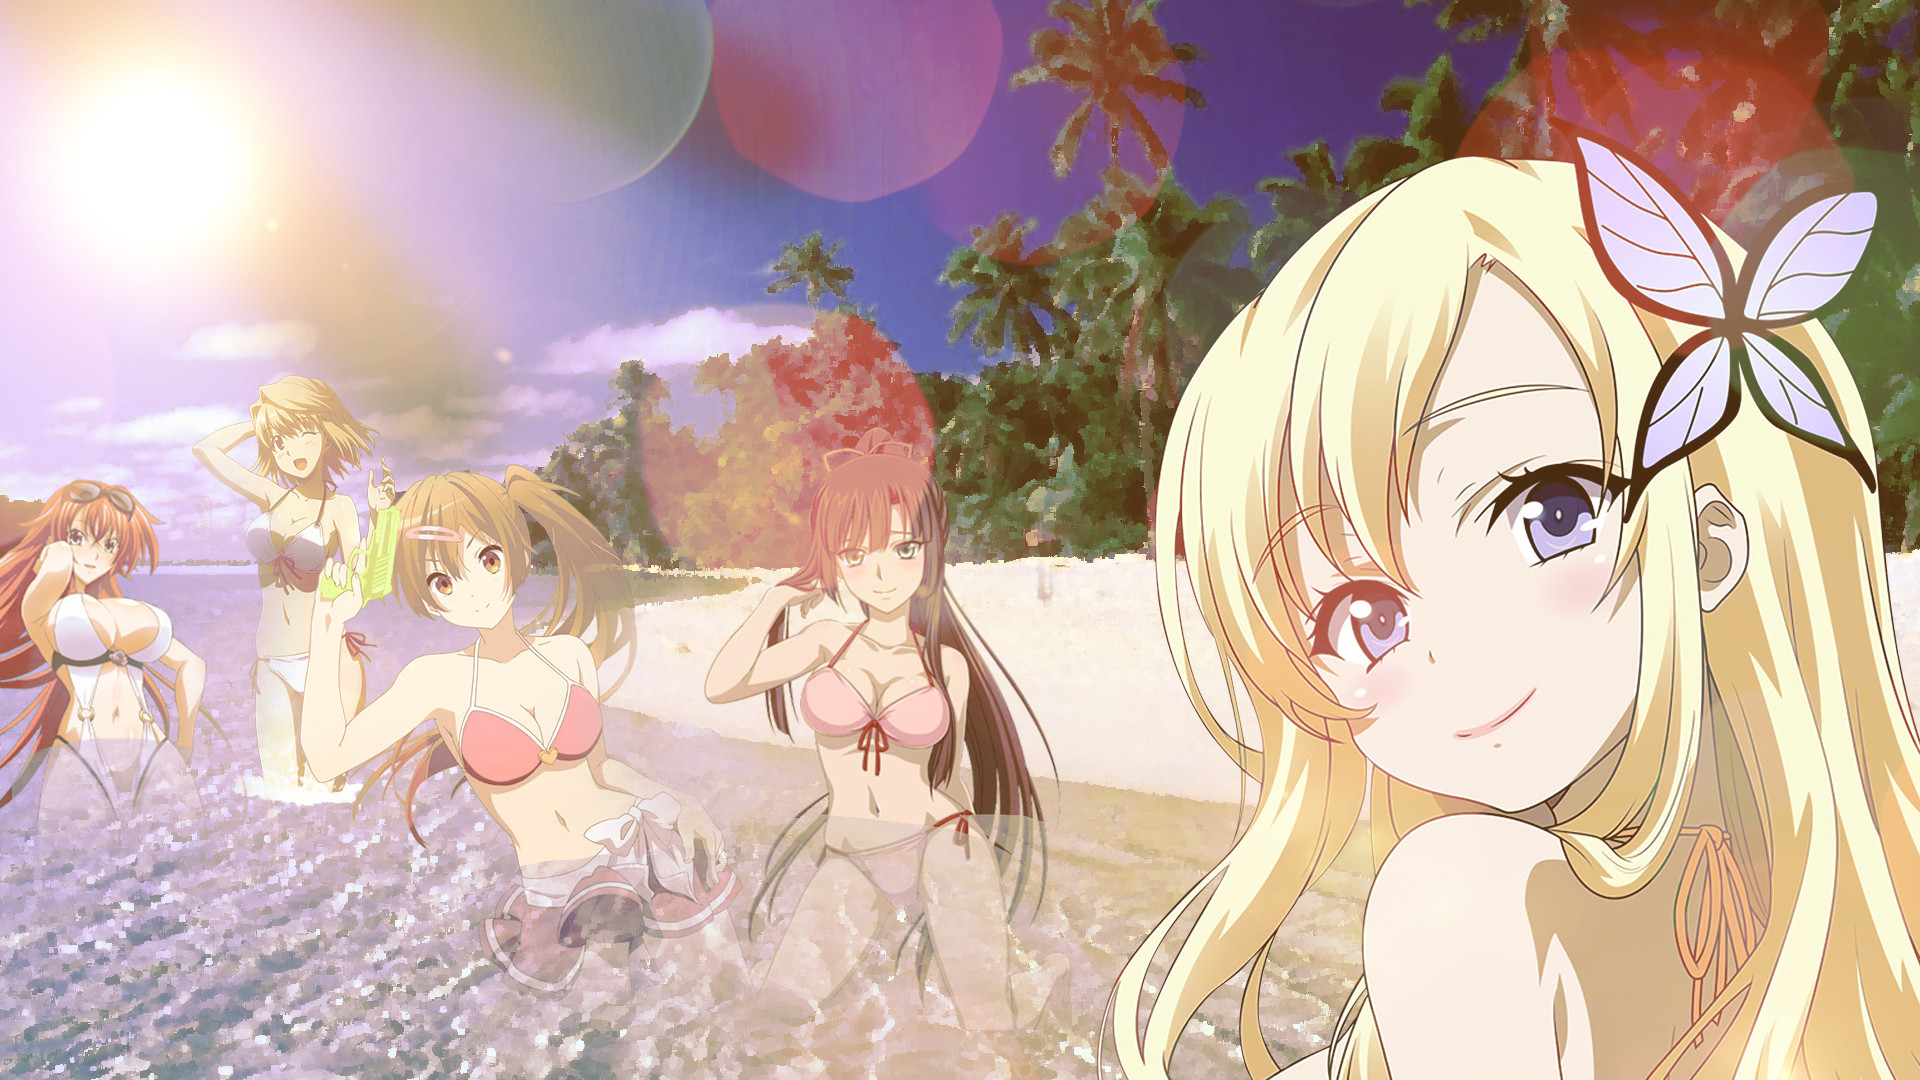 1920x1080 Anime Summertime wallpaper by Ponydesign0 Anime Summertime wallpaper by  Ponydesign0